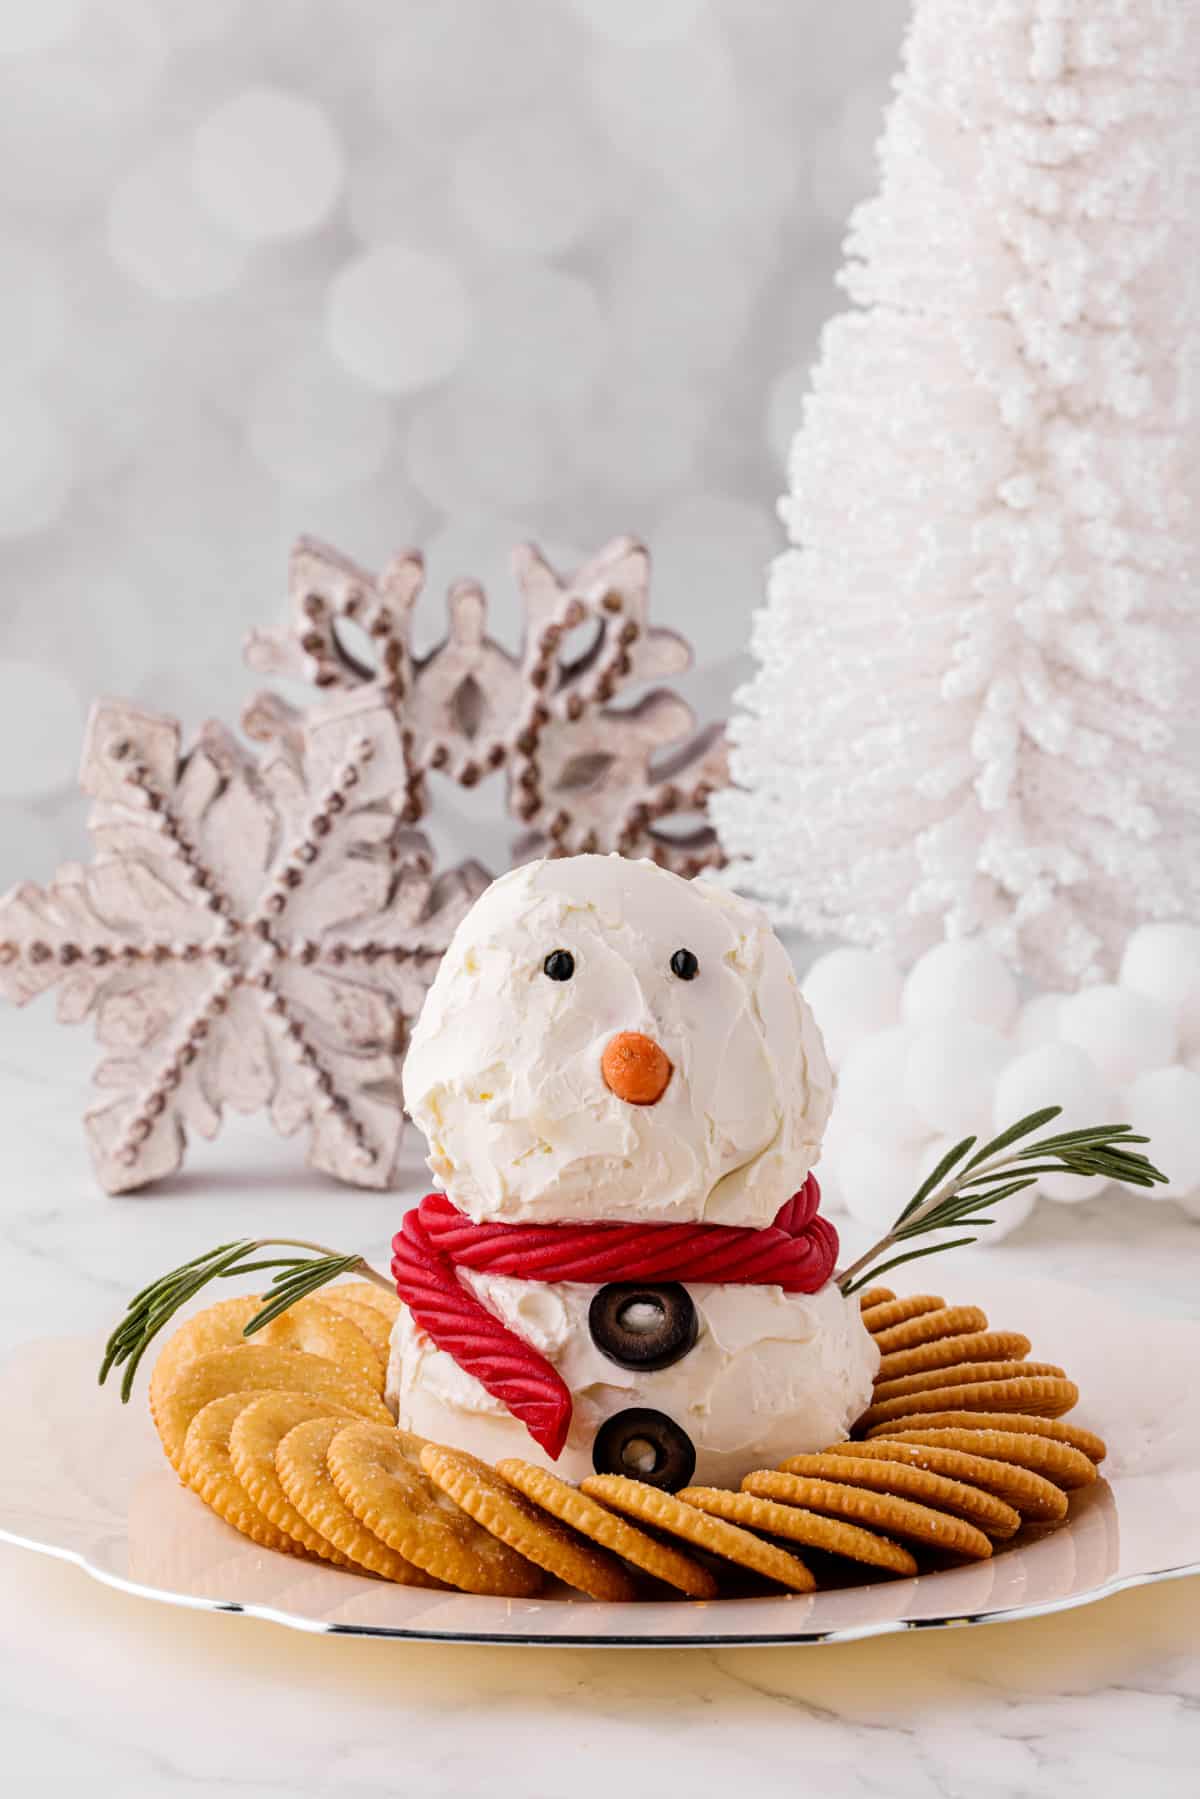 adorable snowman appetizer on a cracker tray by a white Christmas tree and ornaments